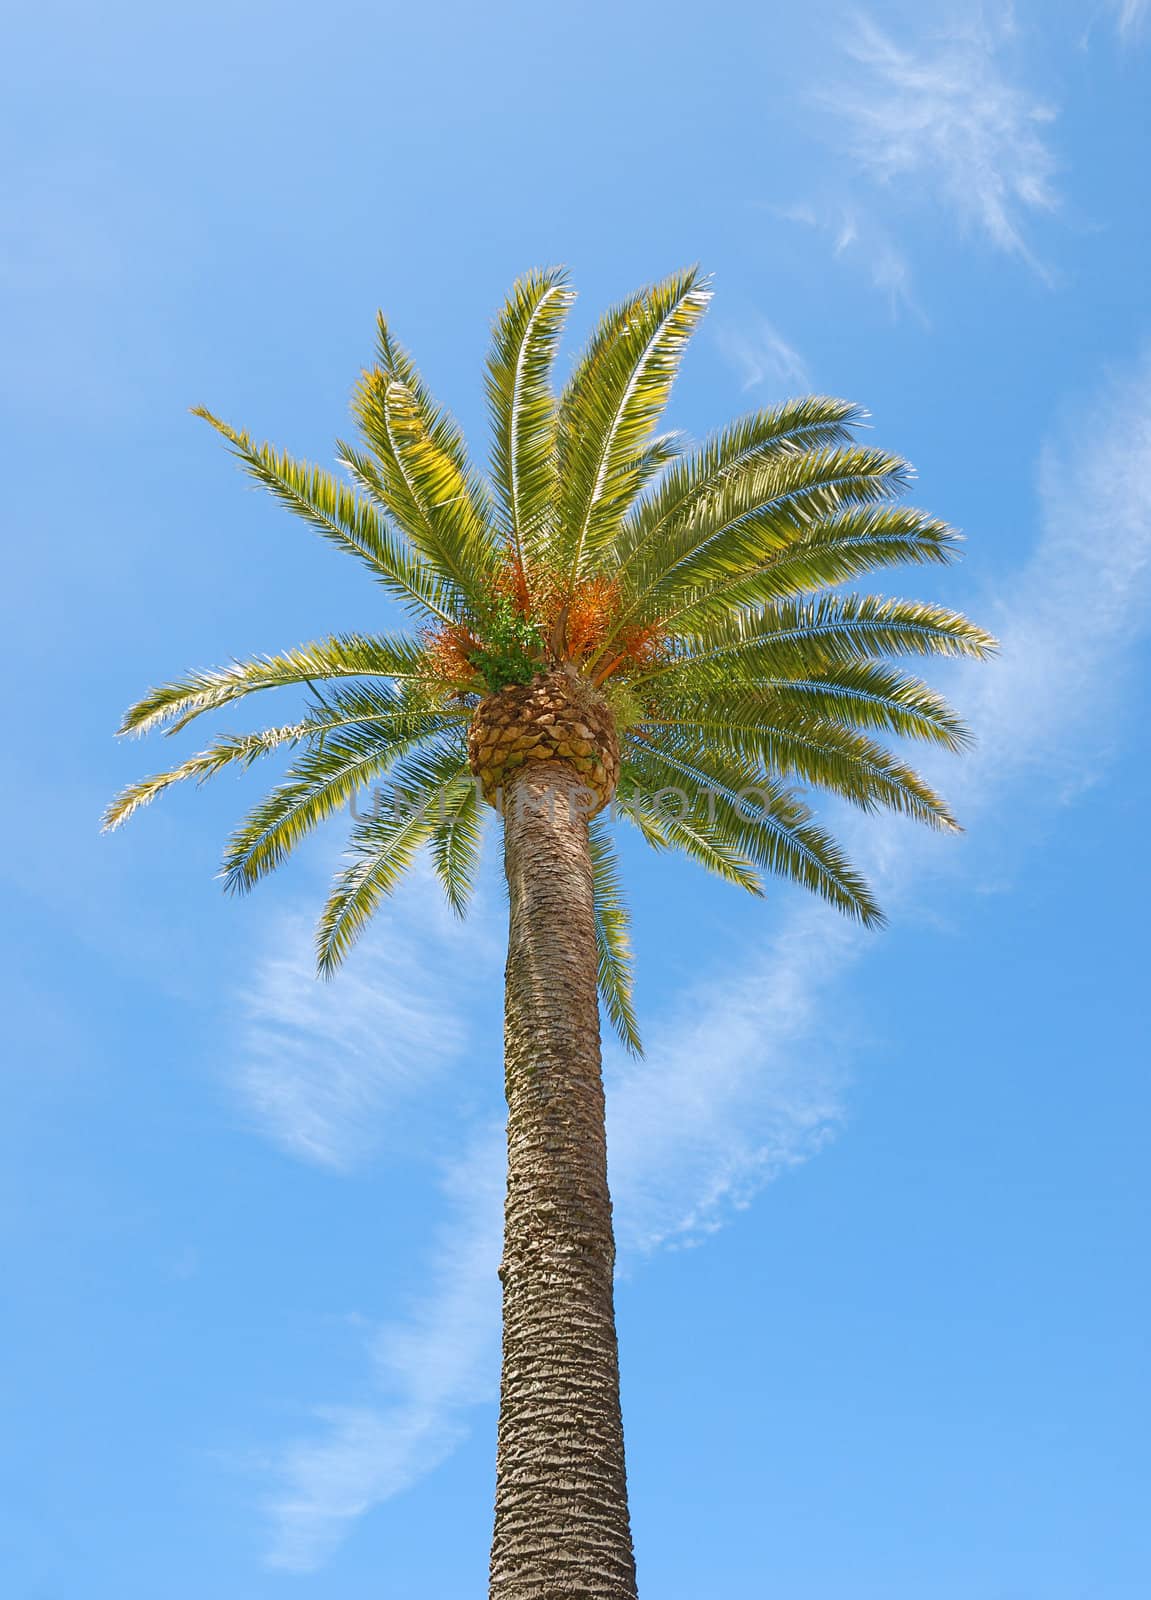 Sunlit palm tree with blue sky background.